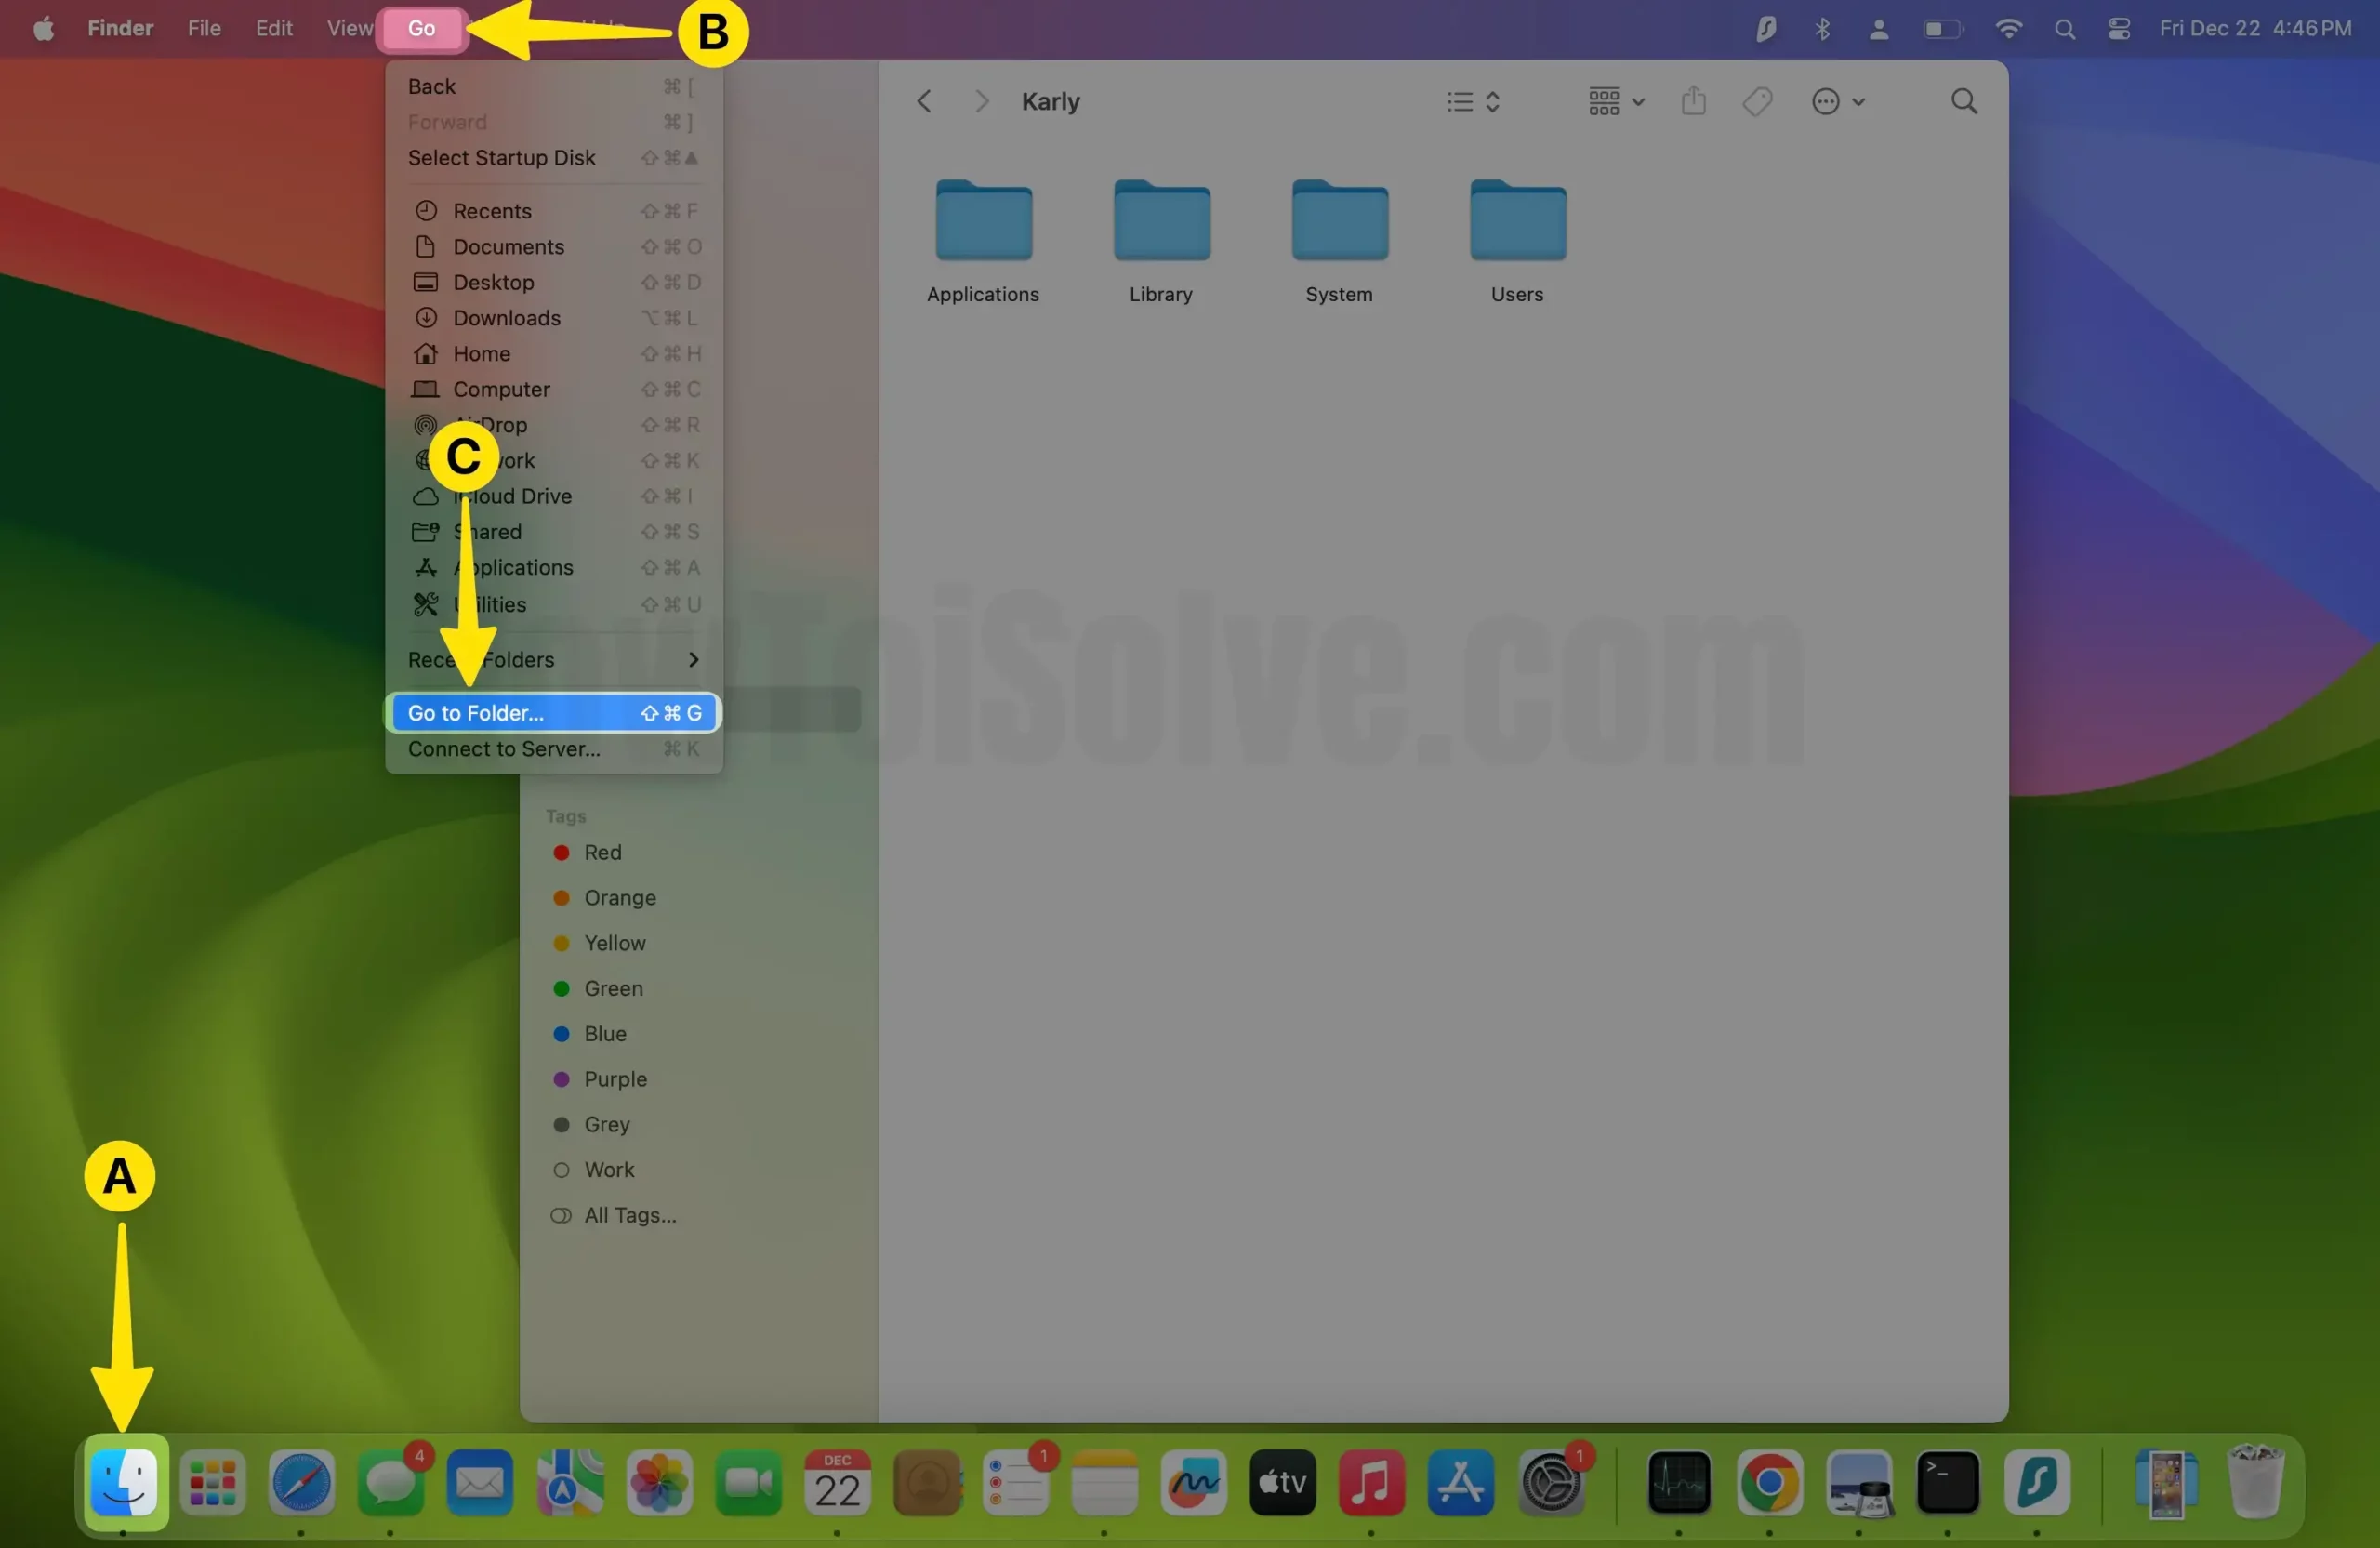 Open Finder Click on Go Select Go to Folder on Mac